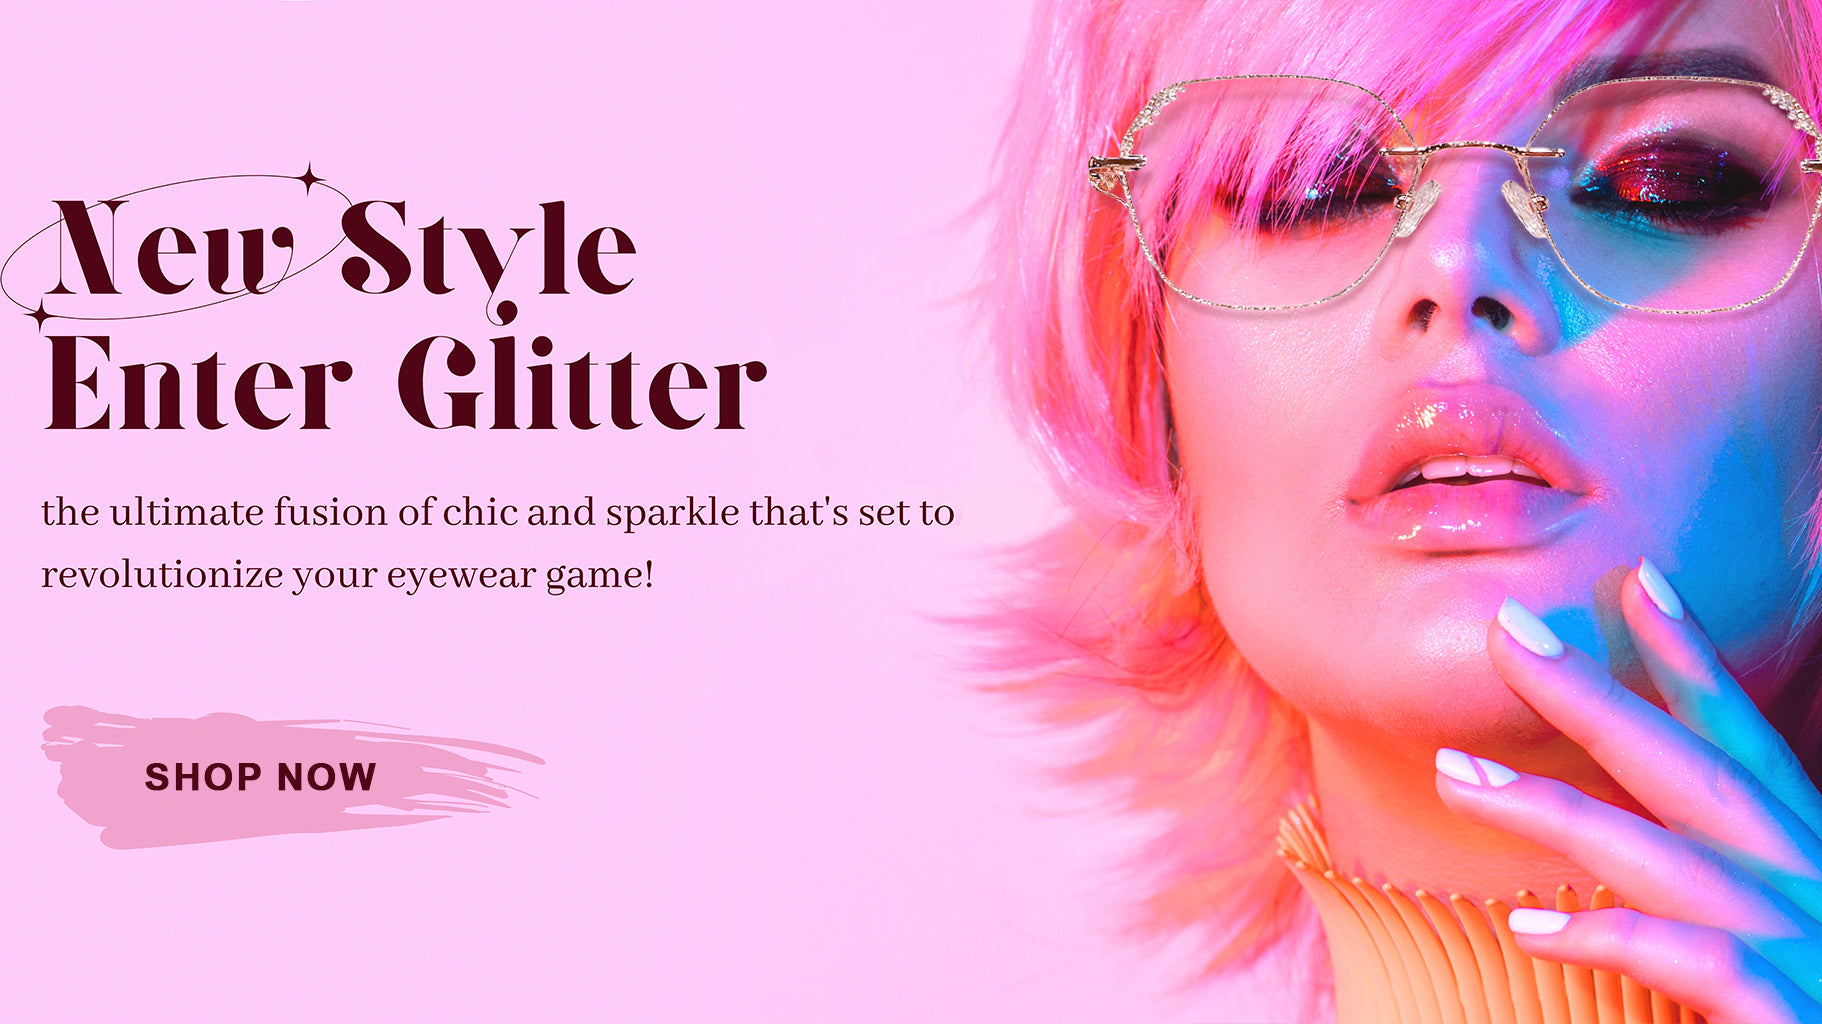 New Women Eyeglasses Recommendation: Glitter For Style Upgrade for the Fashion Forward Queen